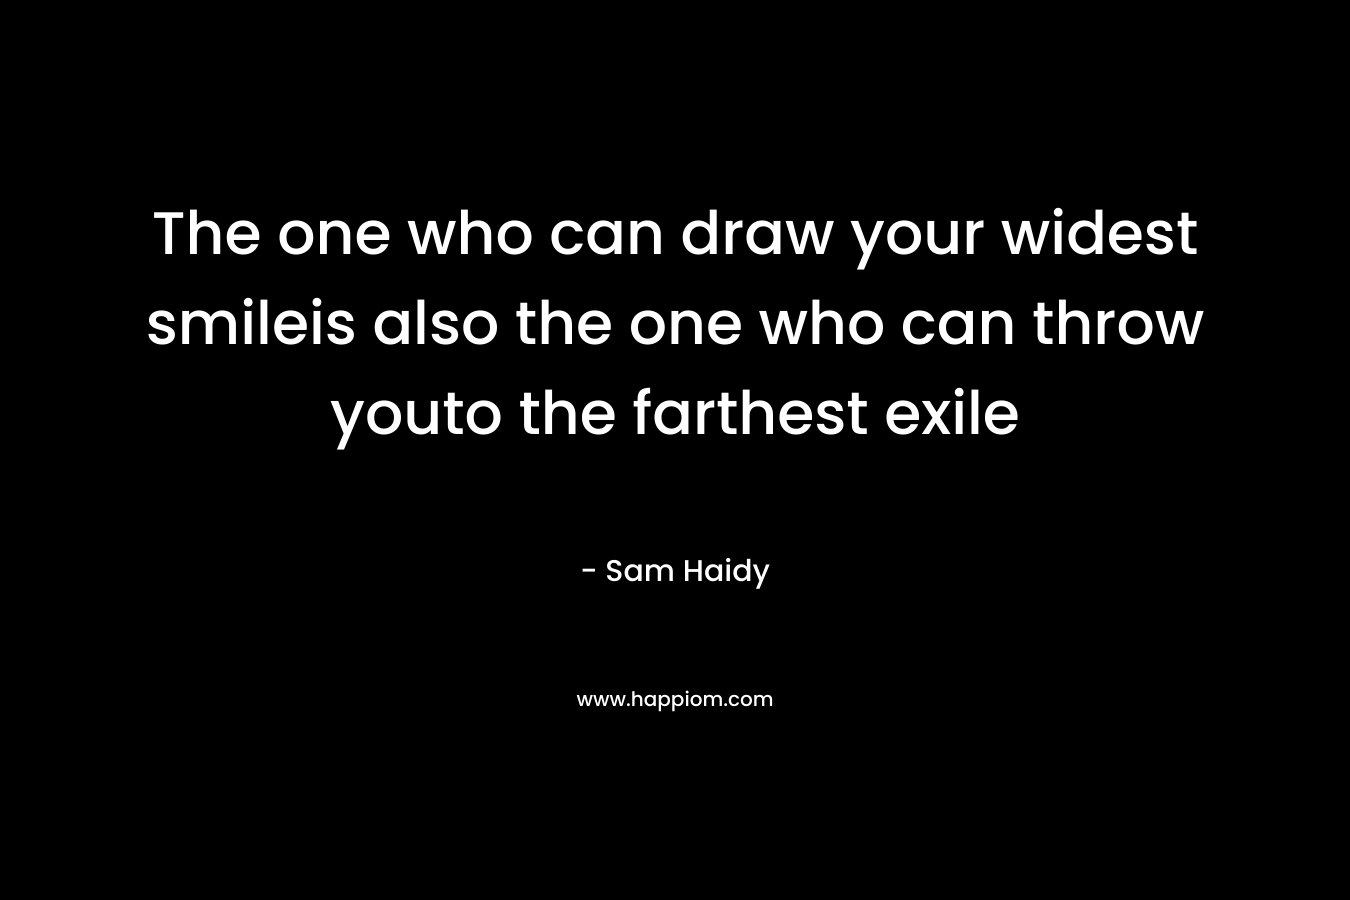 The one who can draw your widest smileis also the one who can throw youto the farthest exile